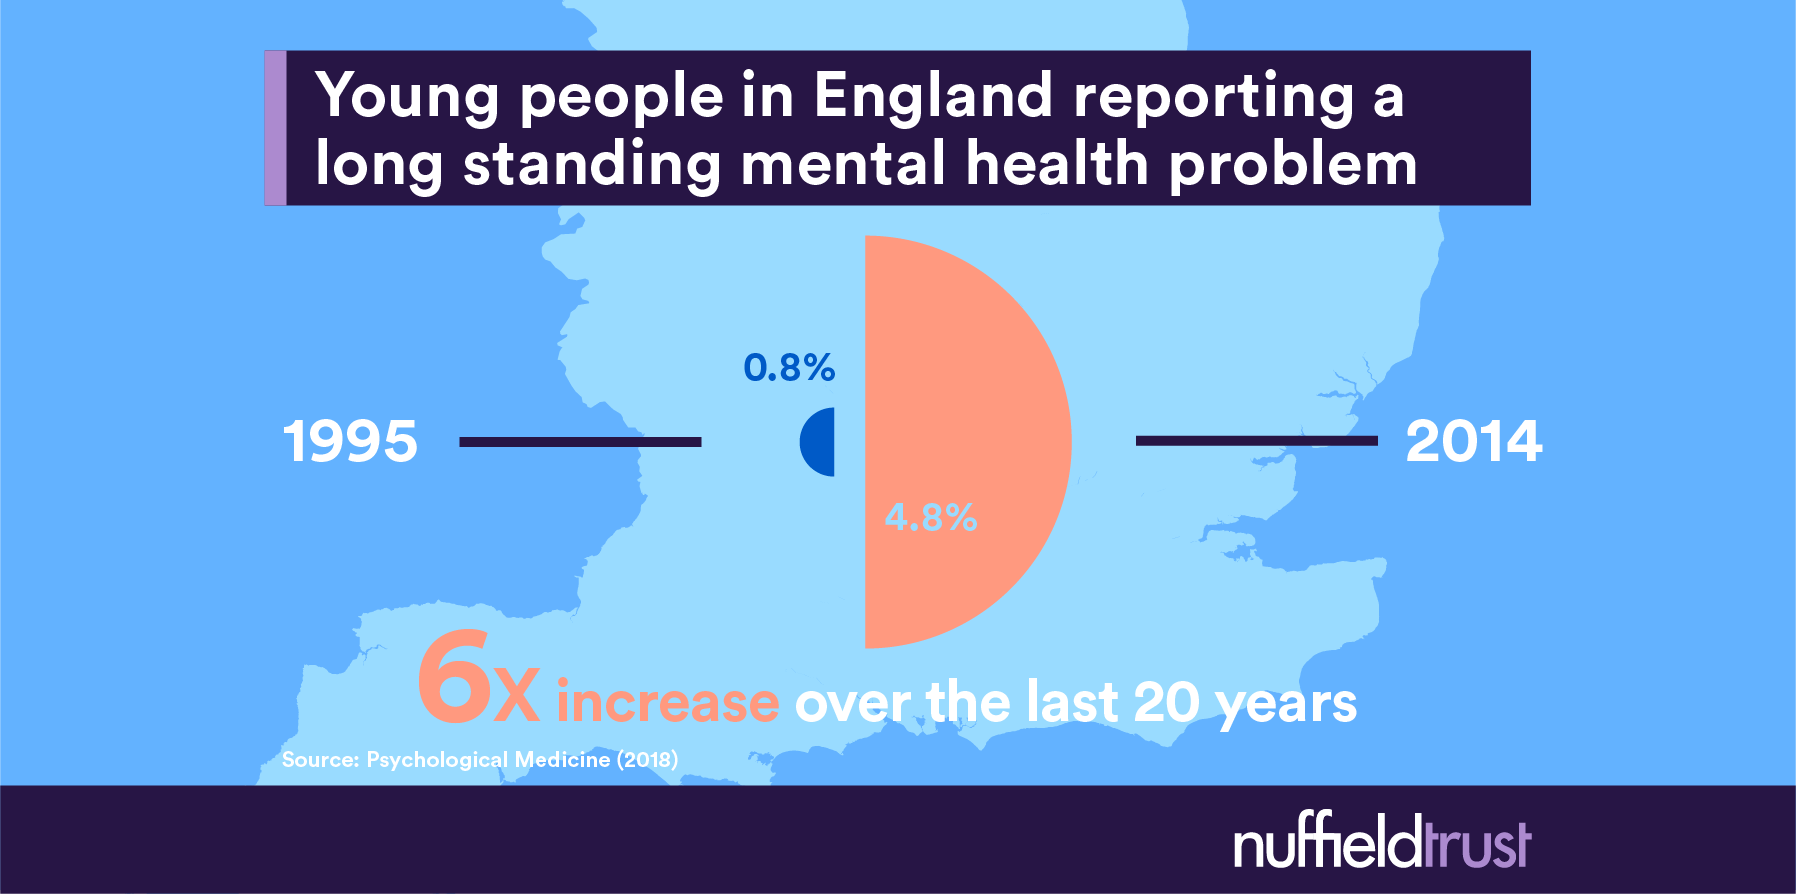 Young people in England reporting a long standing mental health problem